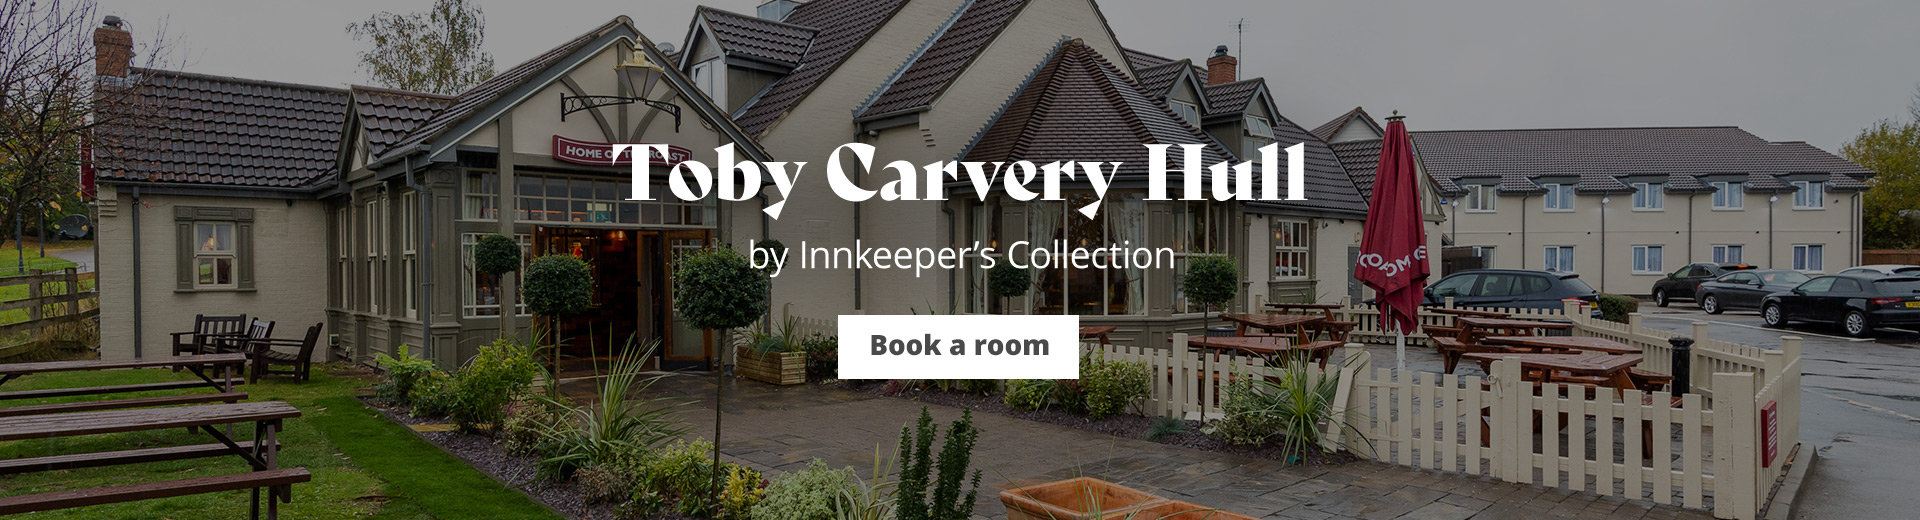 Toby Carvery Willerby Village